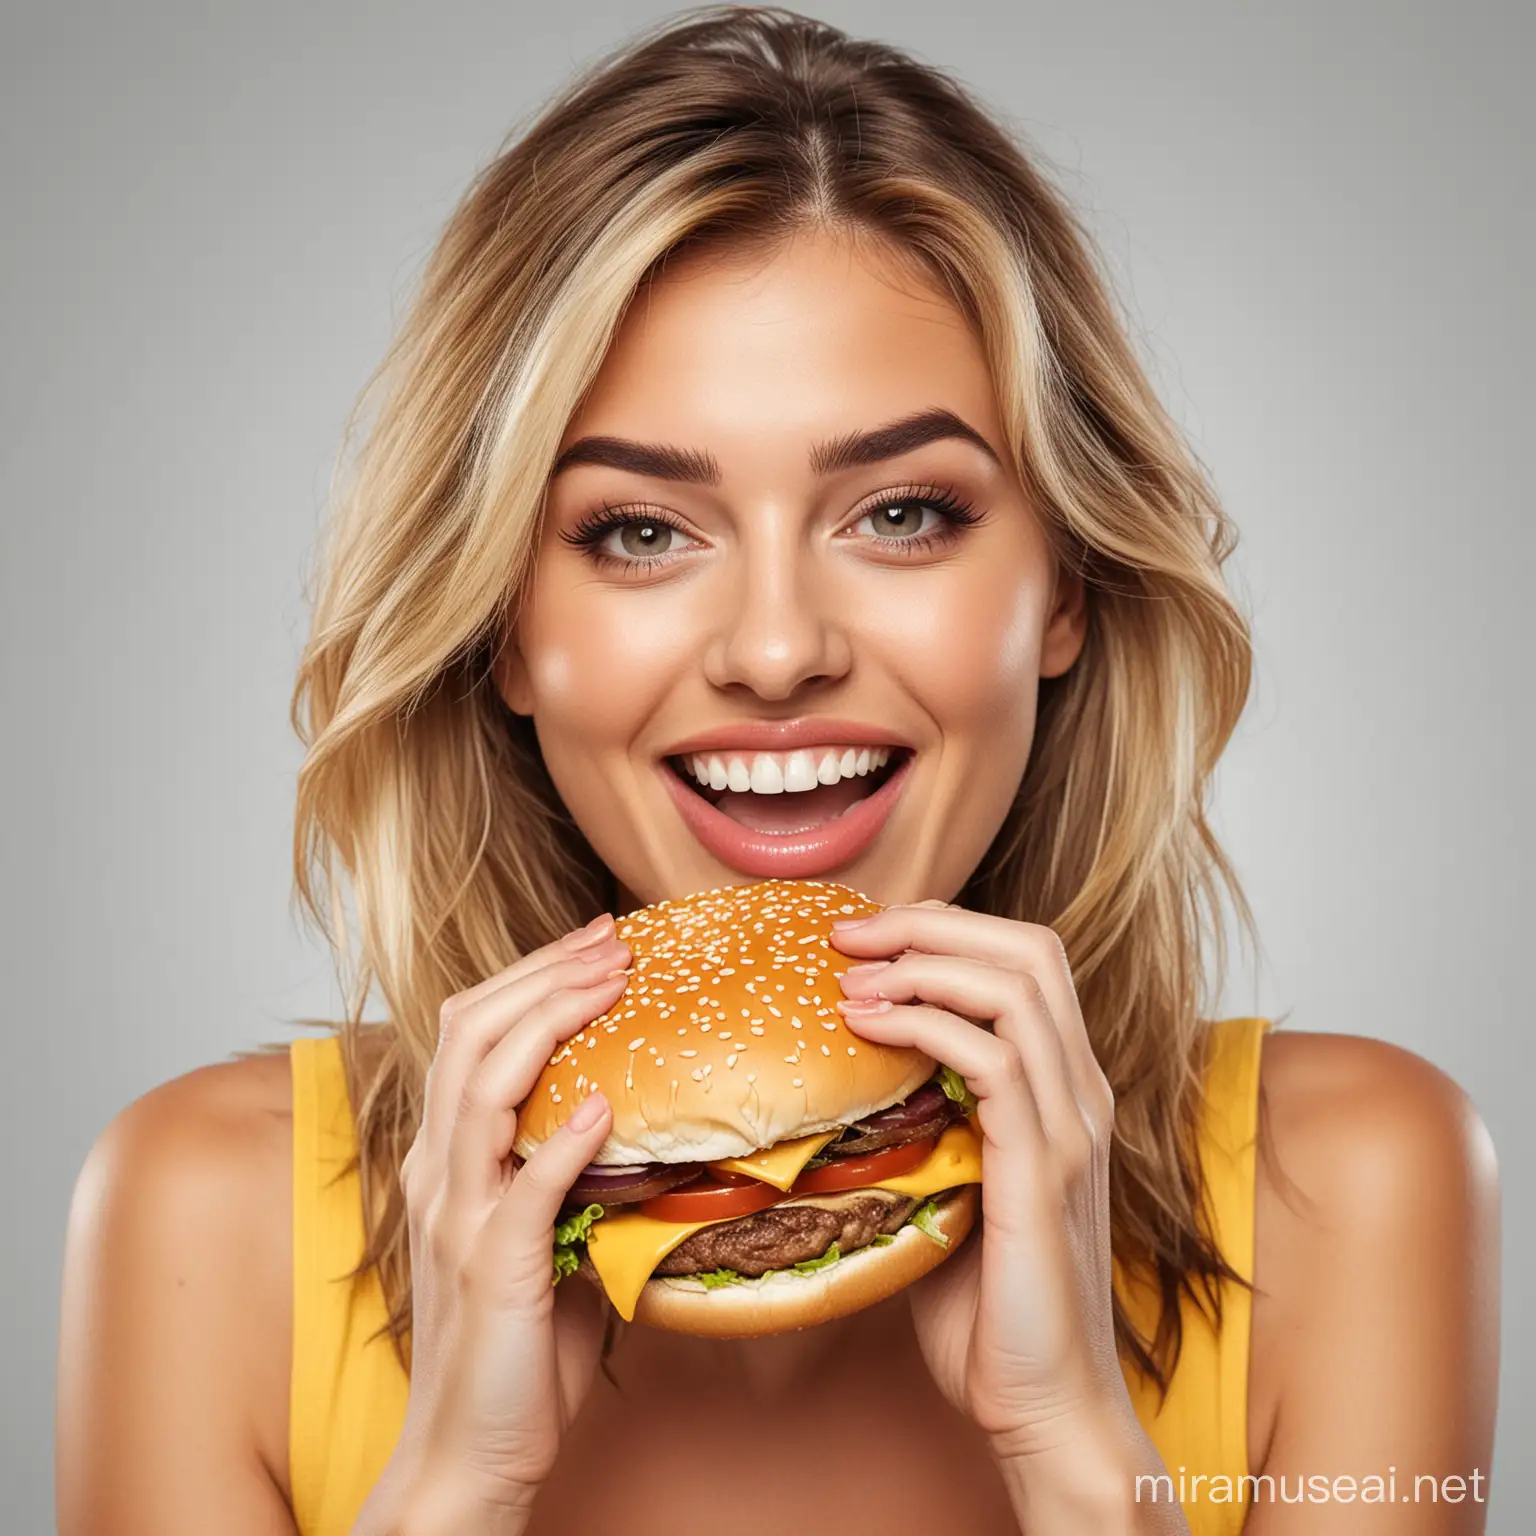 A beaultiful happy woman eating a juicy cheeseburger on a transparent background